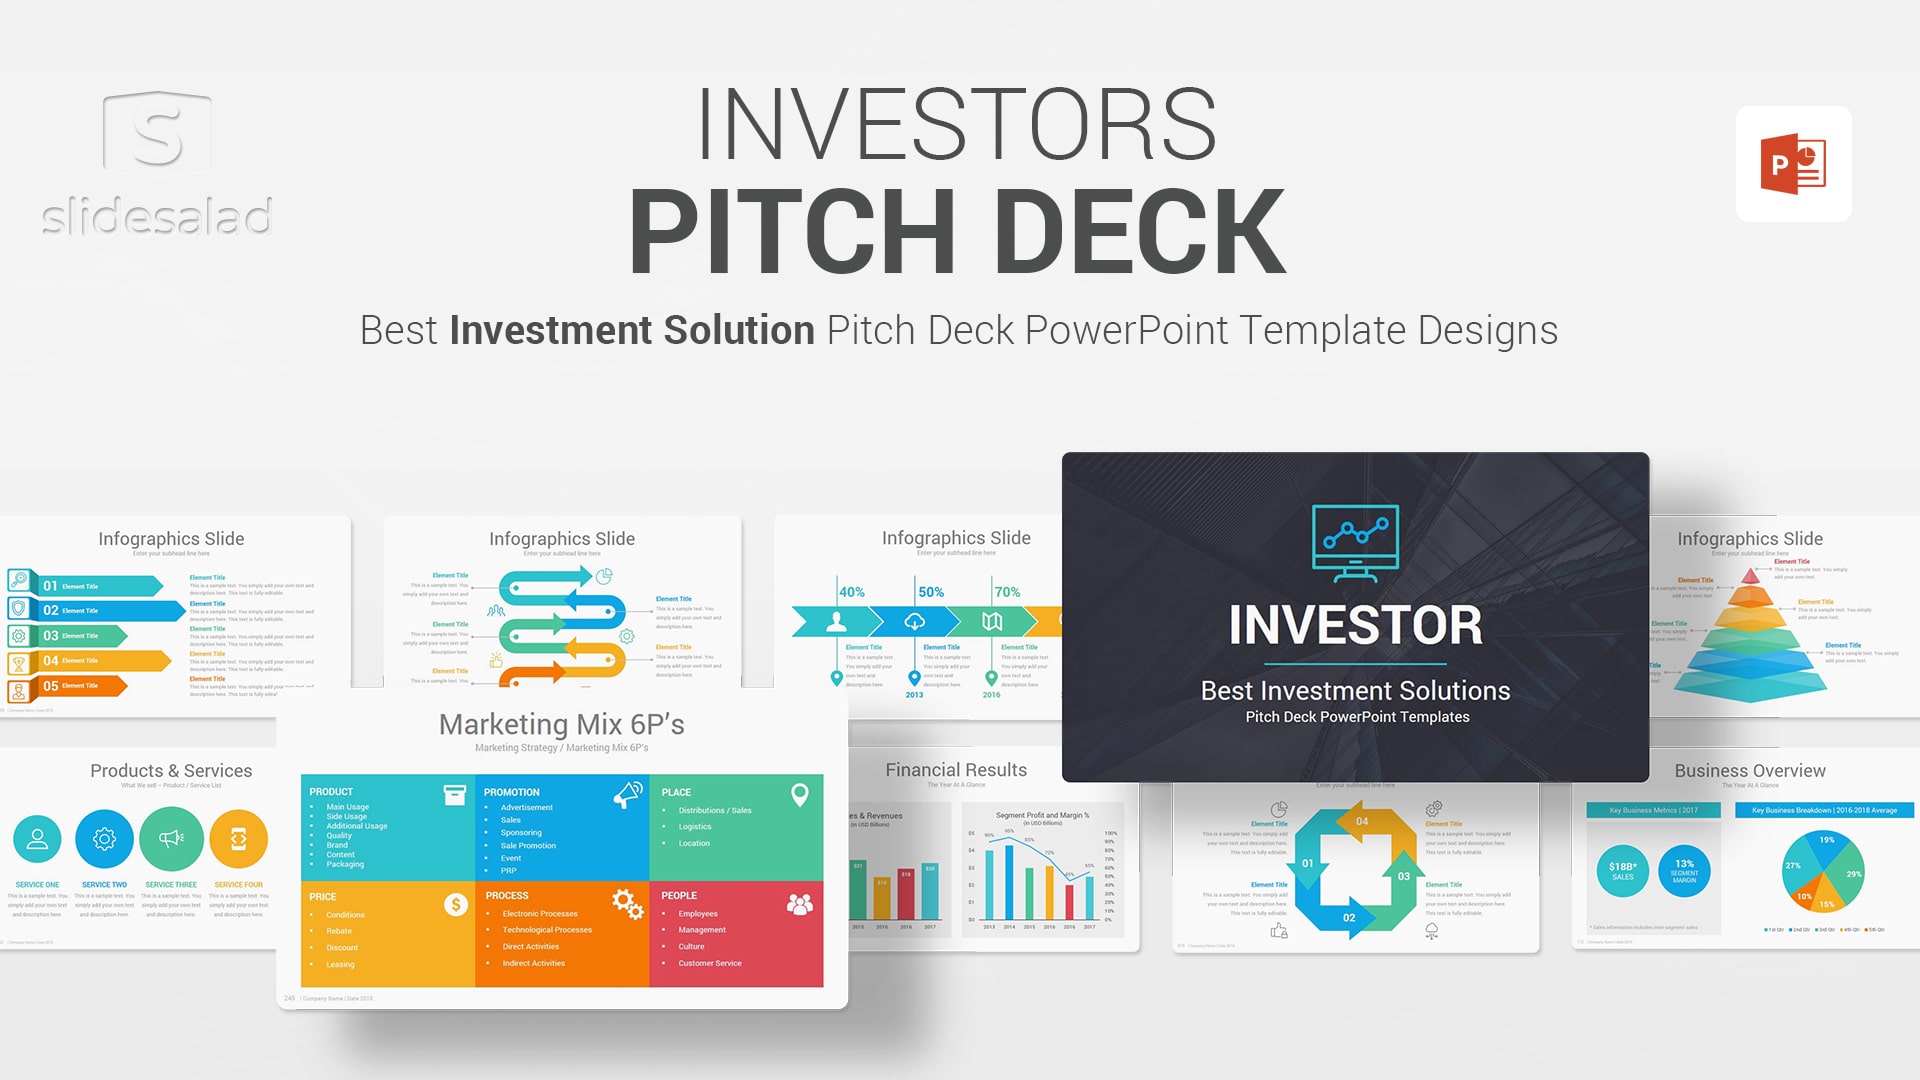 Investors Pitch Deck – Investment Proposal PowerPoint Templates - Startup Pitch Deck Webinar PowerPoint Templates